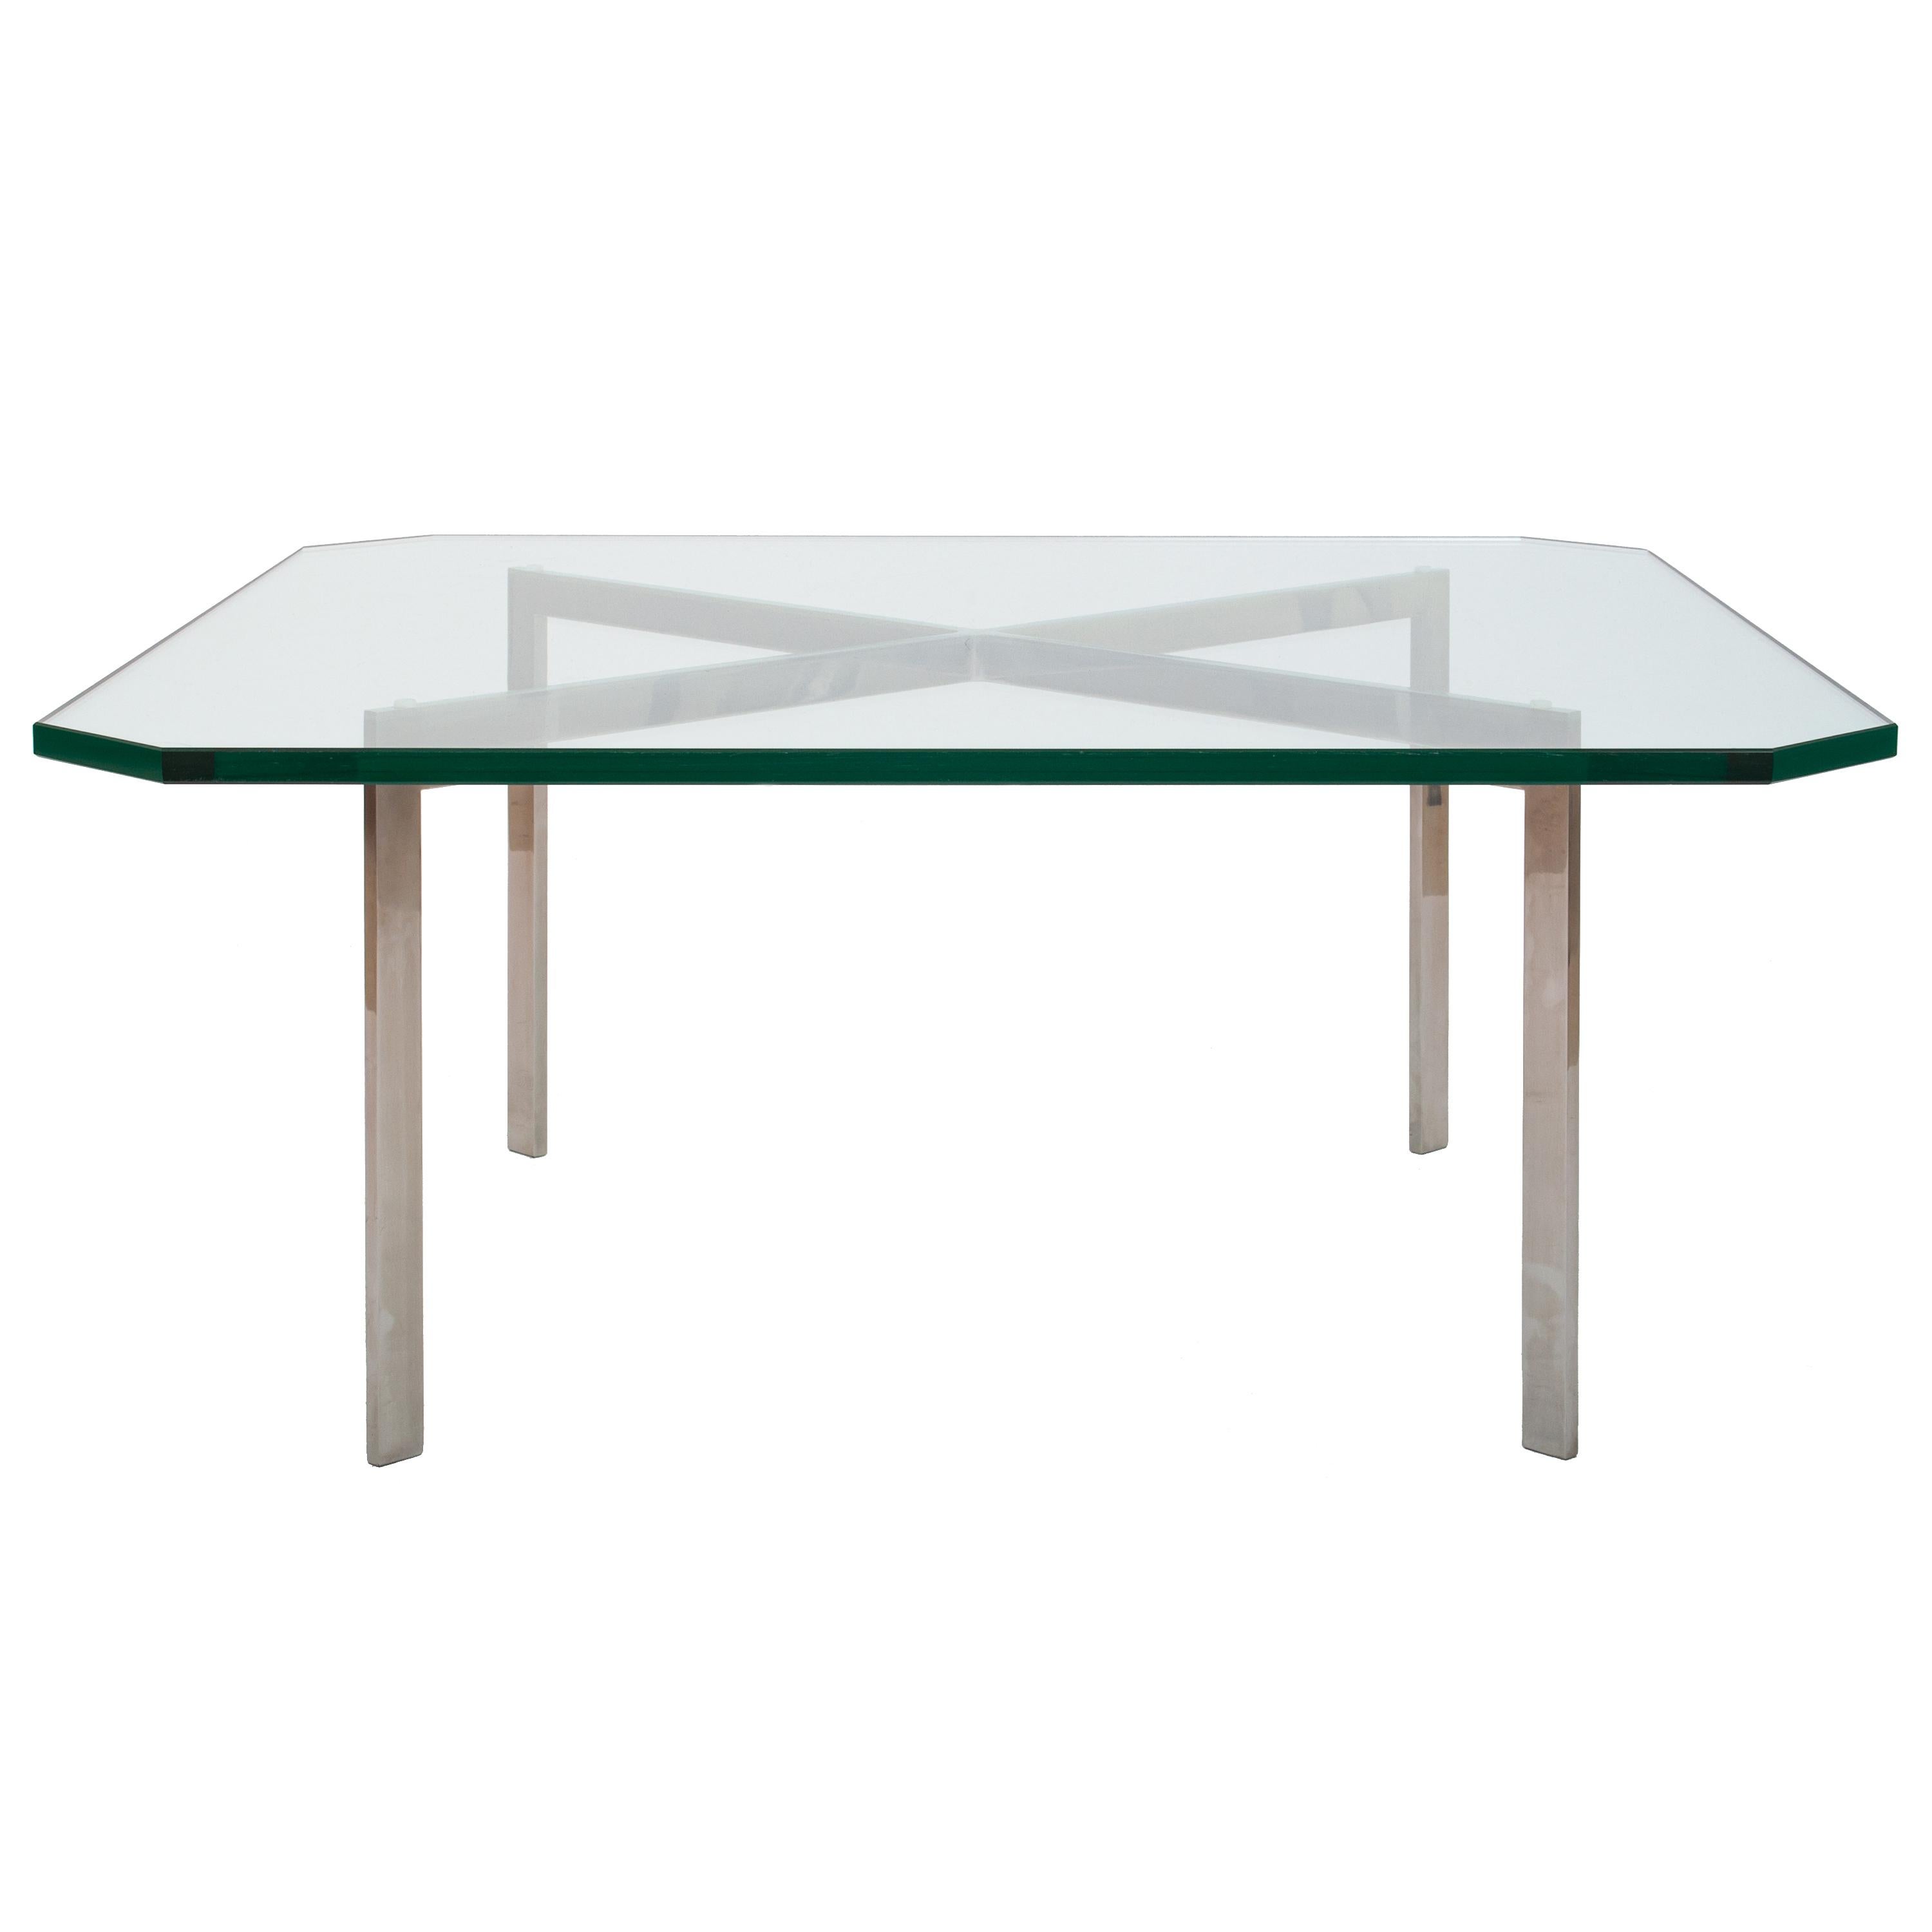 An early pre Knoll production 1955 Mies Van Der Rohe, 252 Barcelona table.
The table was purchased as a wedding gift for a prominent West Coast architect in the 1950's. Both the stainless steel table base & glass top are original, however is seems